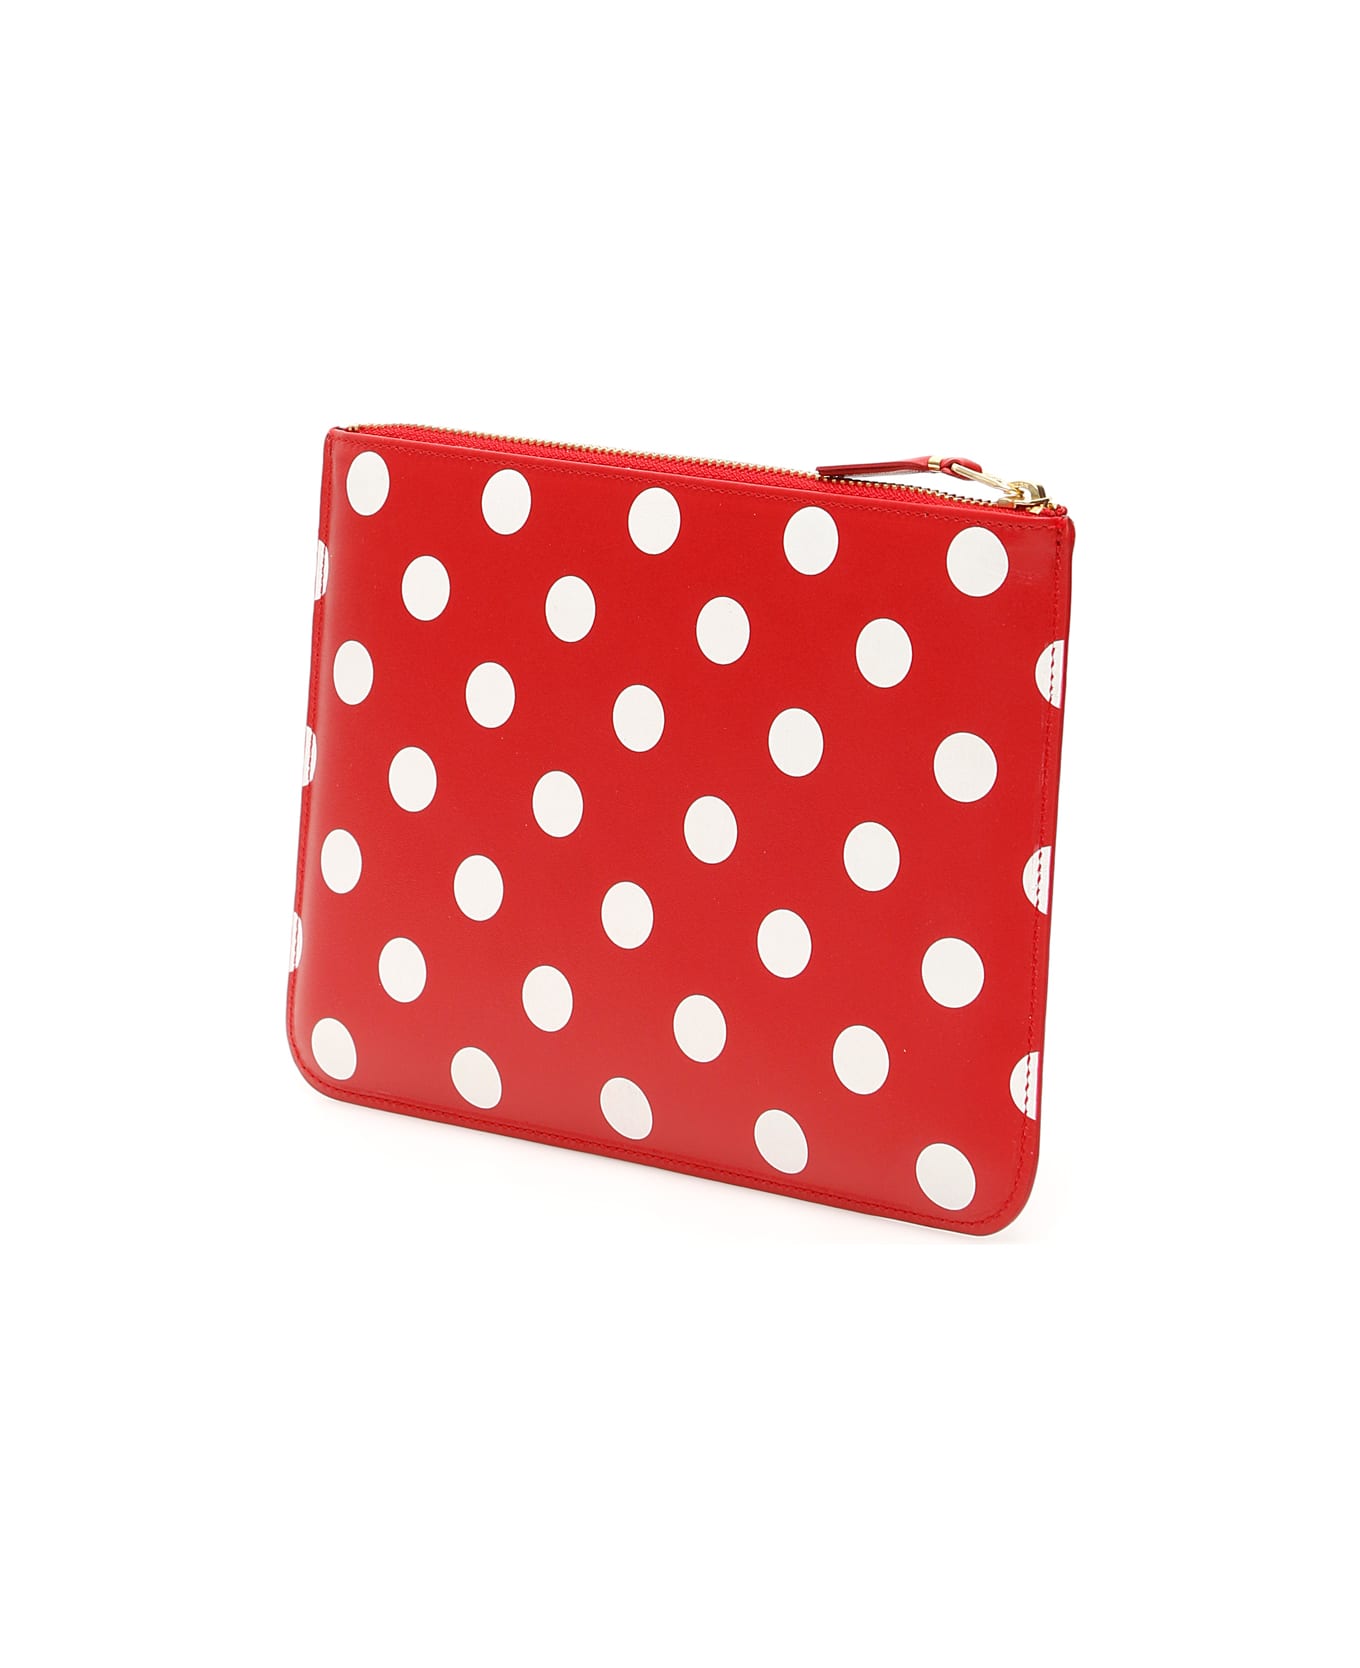 Comme des Garçons Wallet Polka Dots Pouch - Red Red